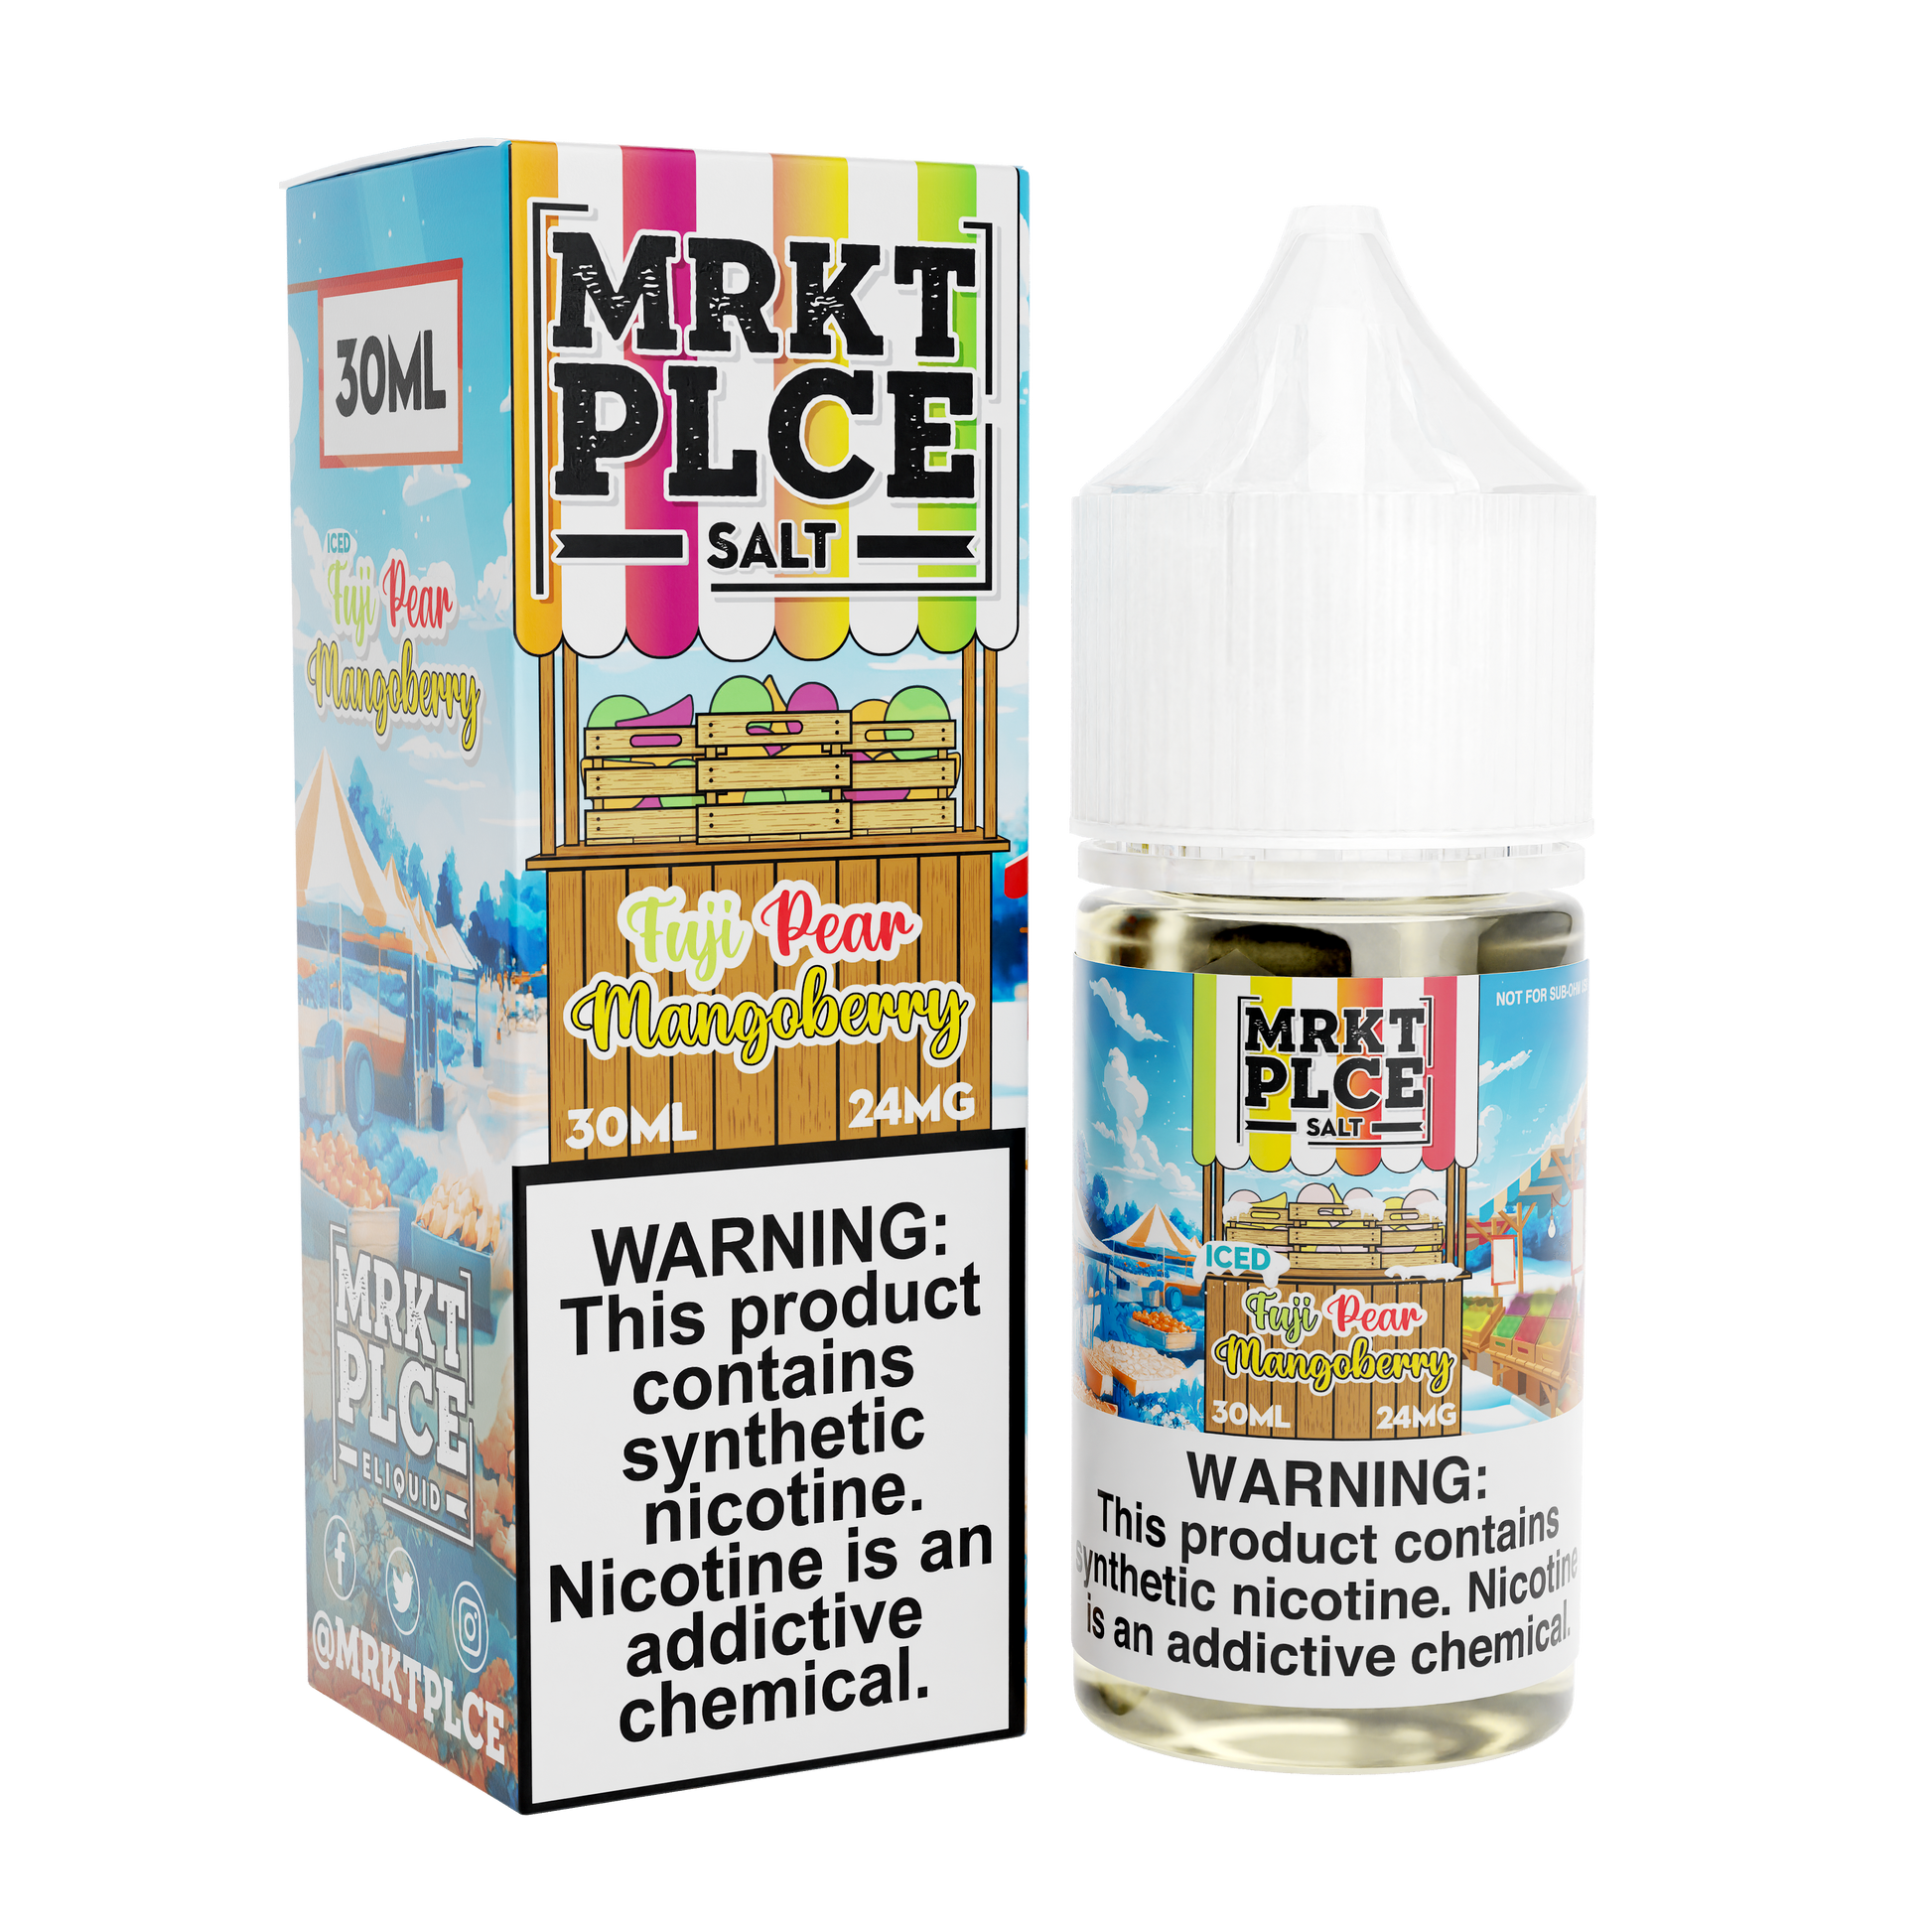 Iced Fuji Pear Mangoberry by MRKT PLCE Salts 30mL with packaging